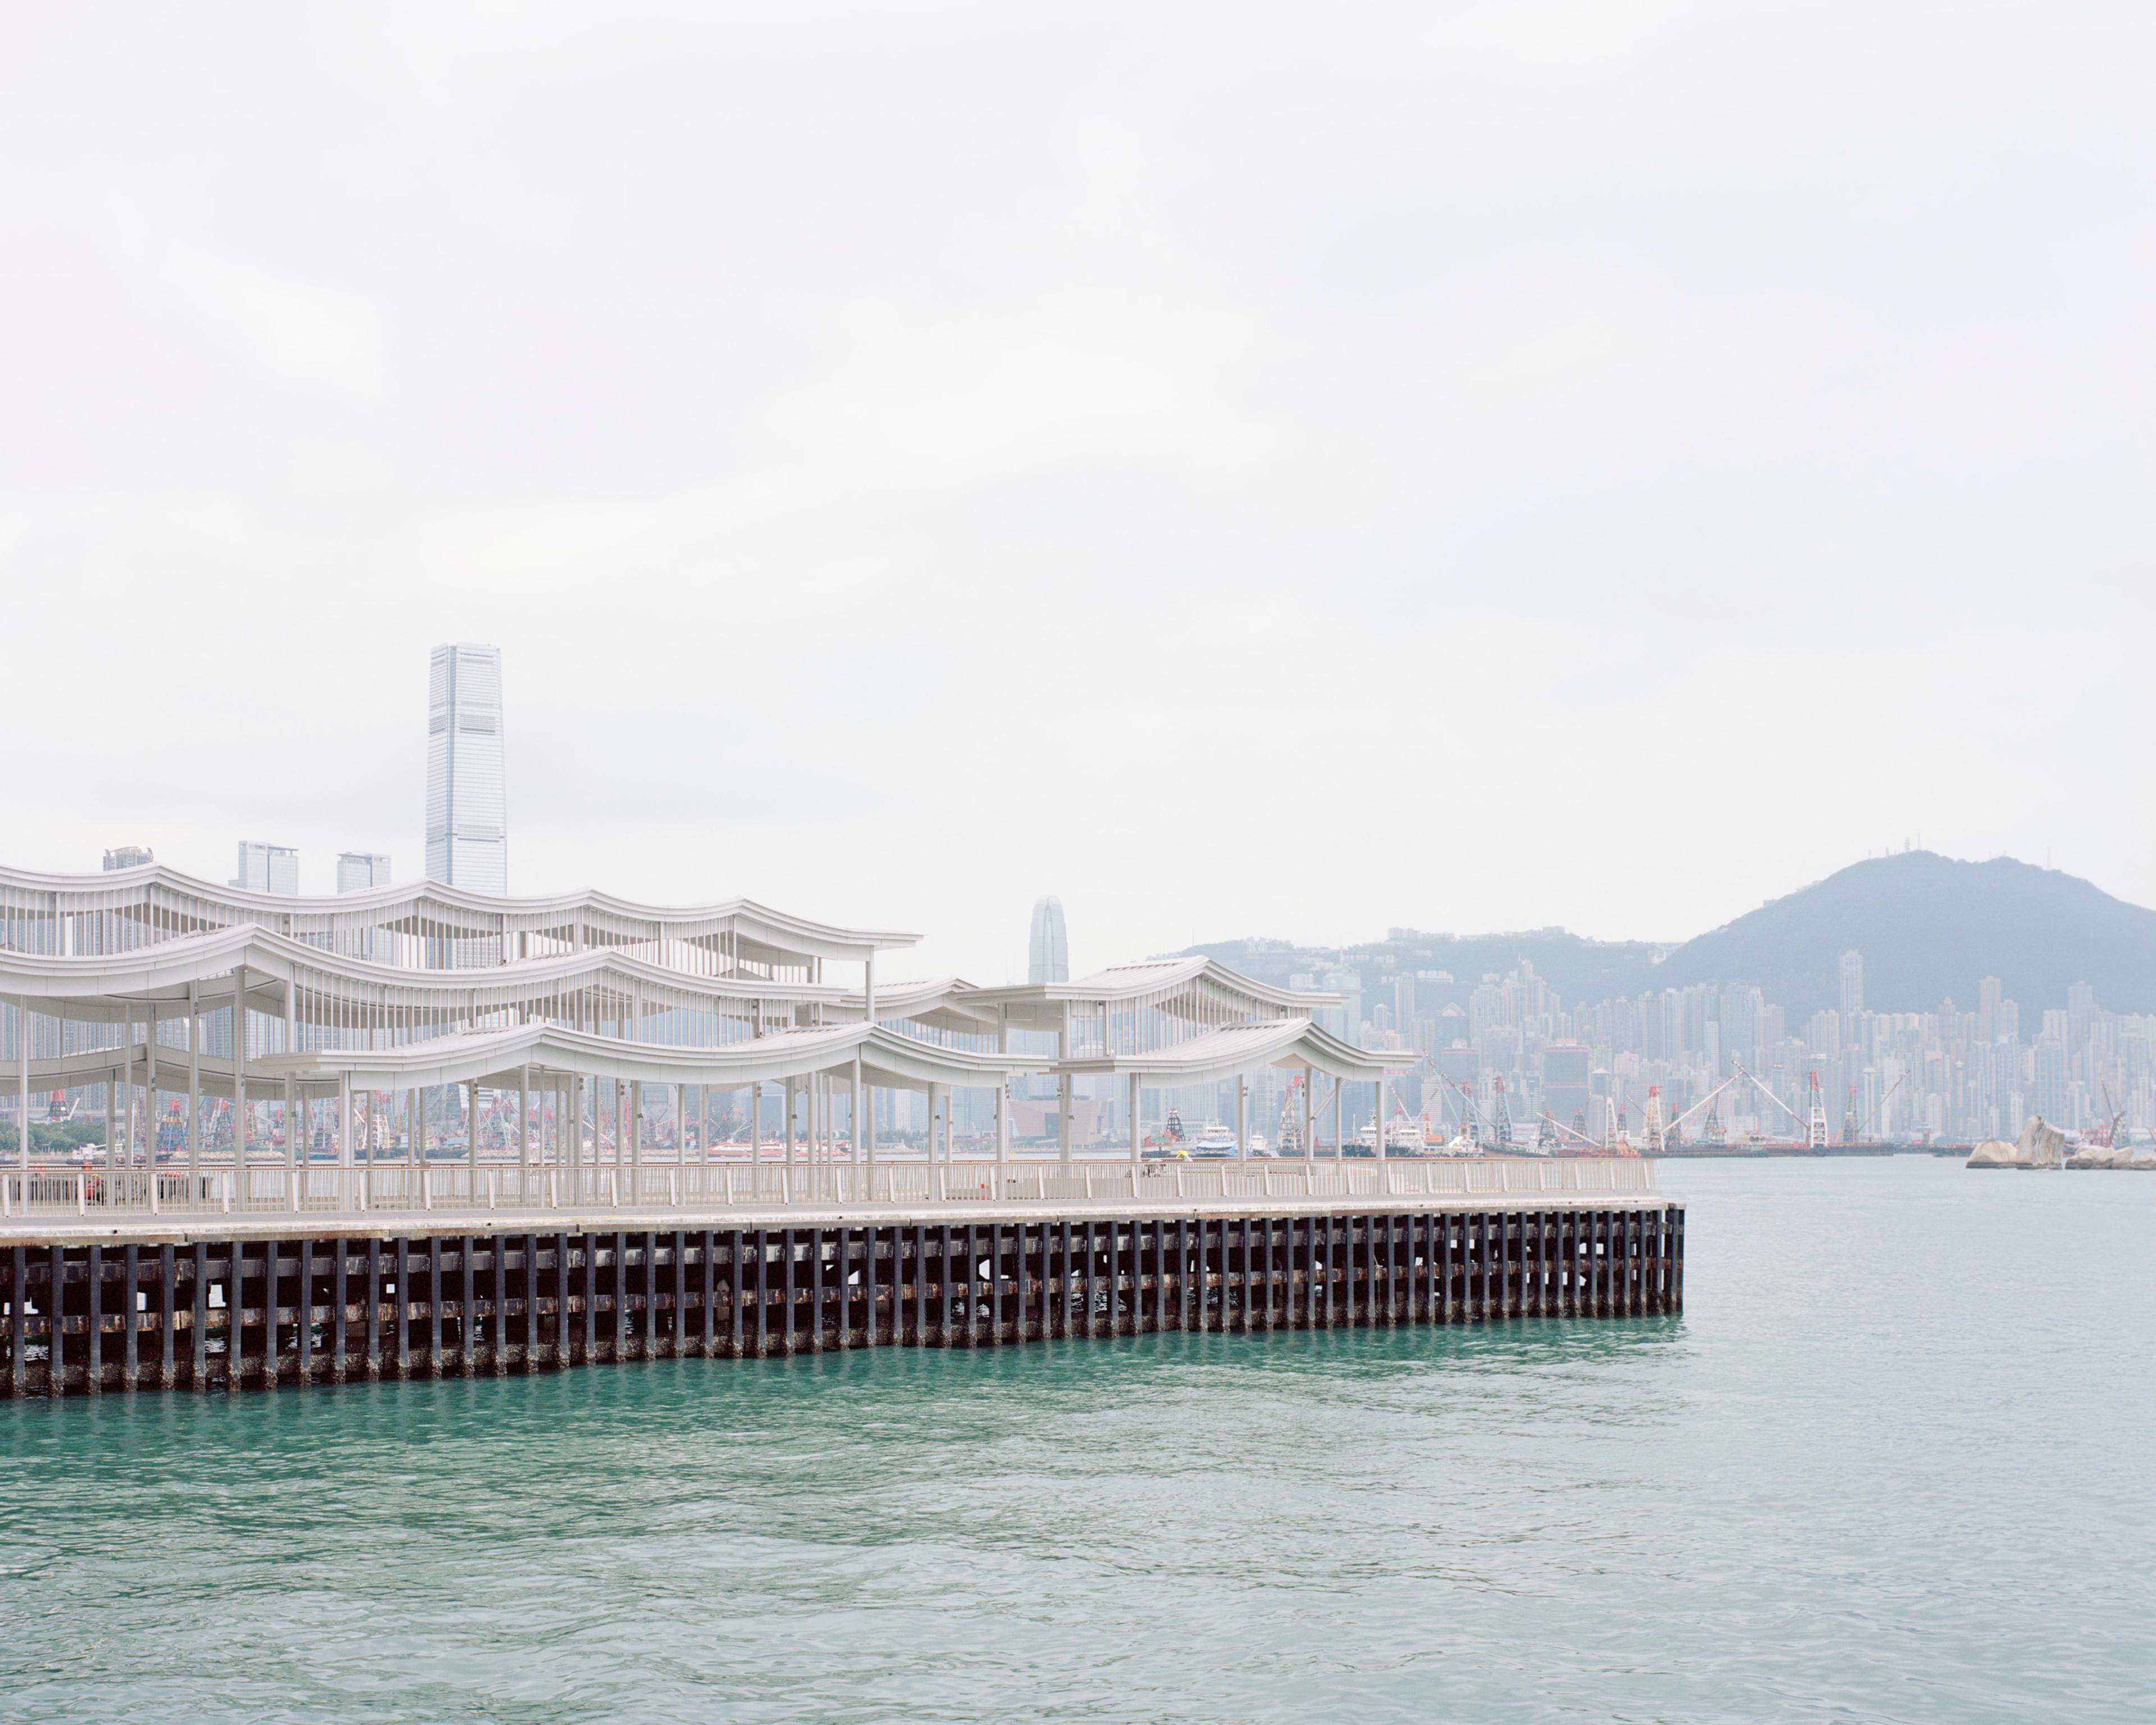 Elevation view of undulating pier canopy and Hong Kong skyline in background